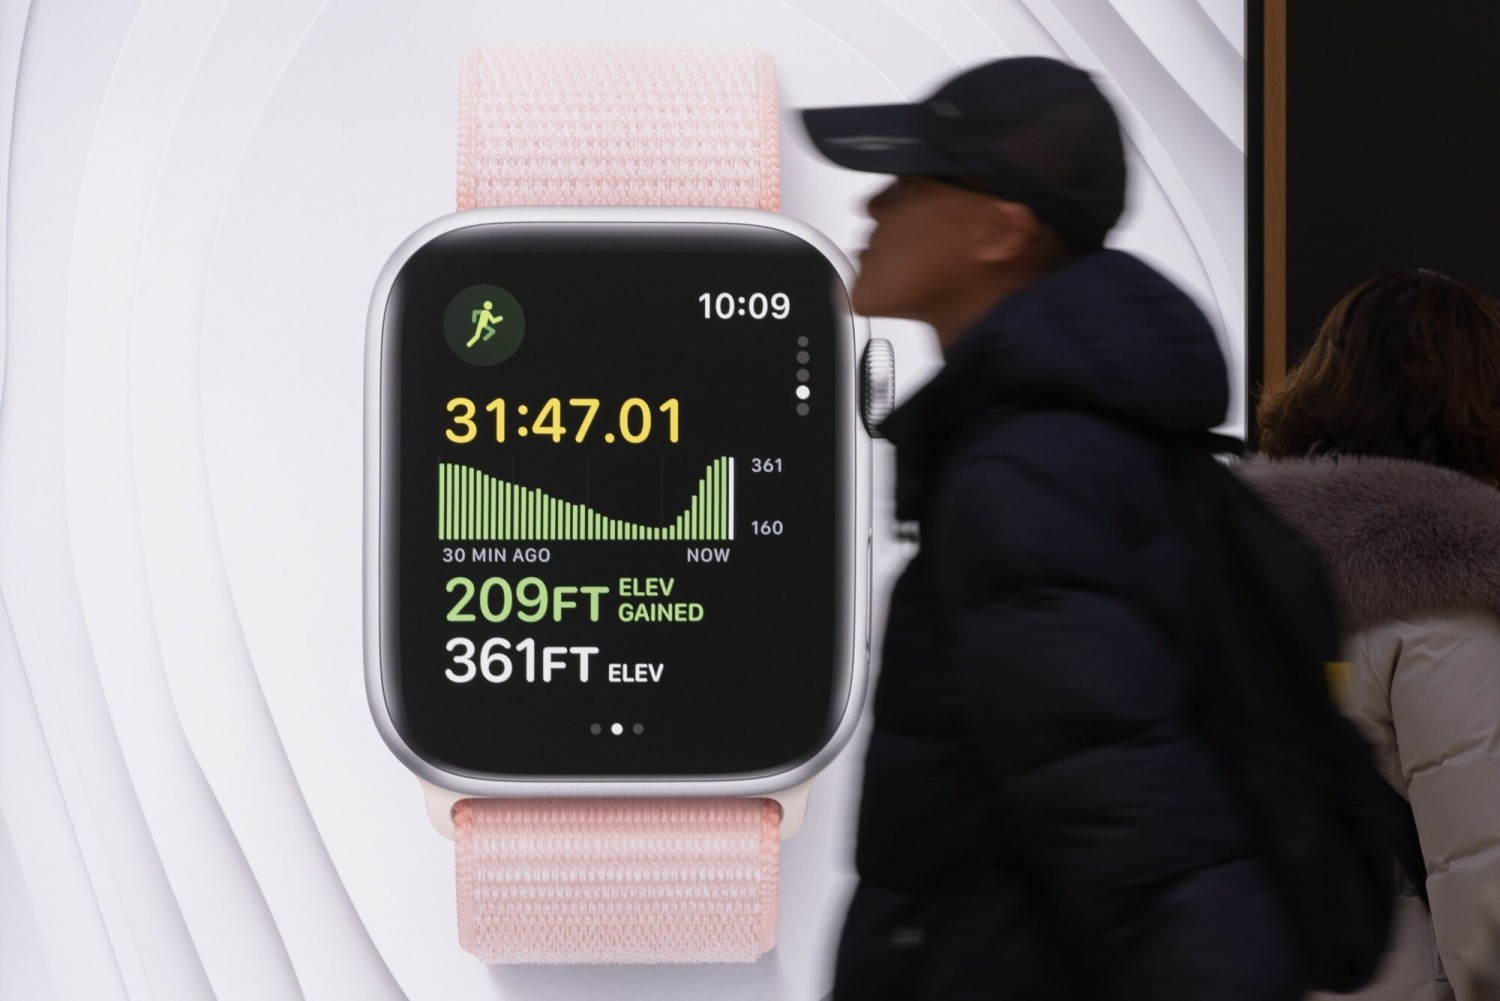 What’s Next for the Apple Watch: Bigger Screens But a Similar Look